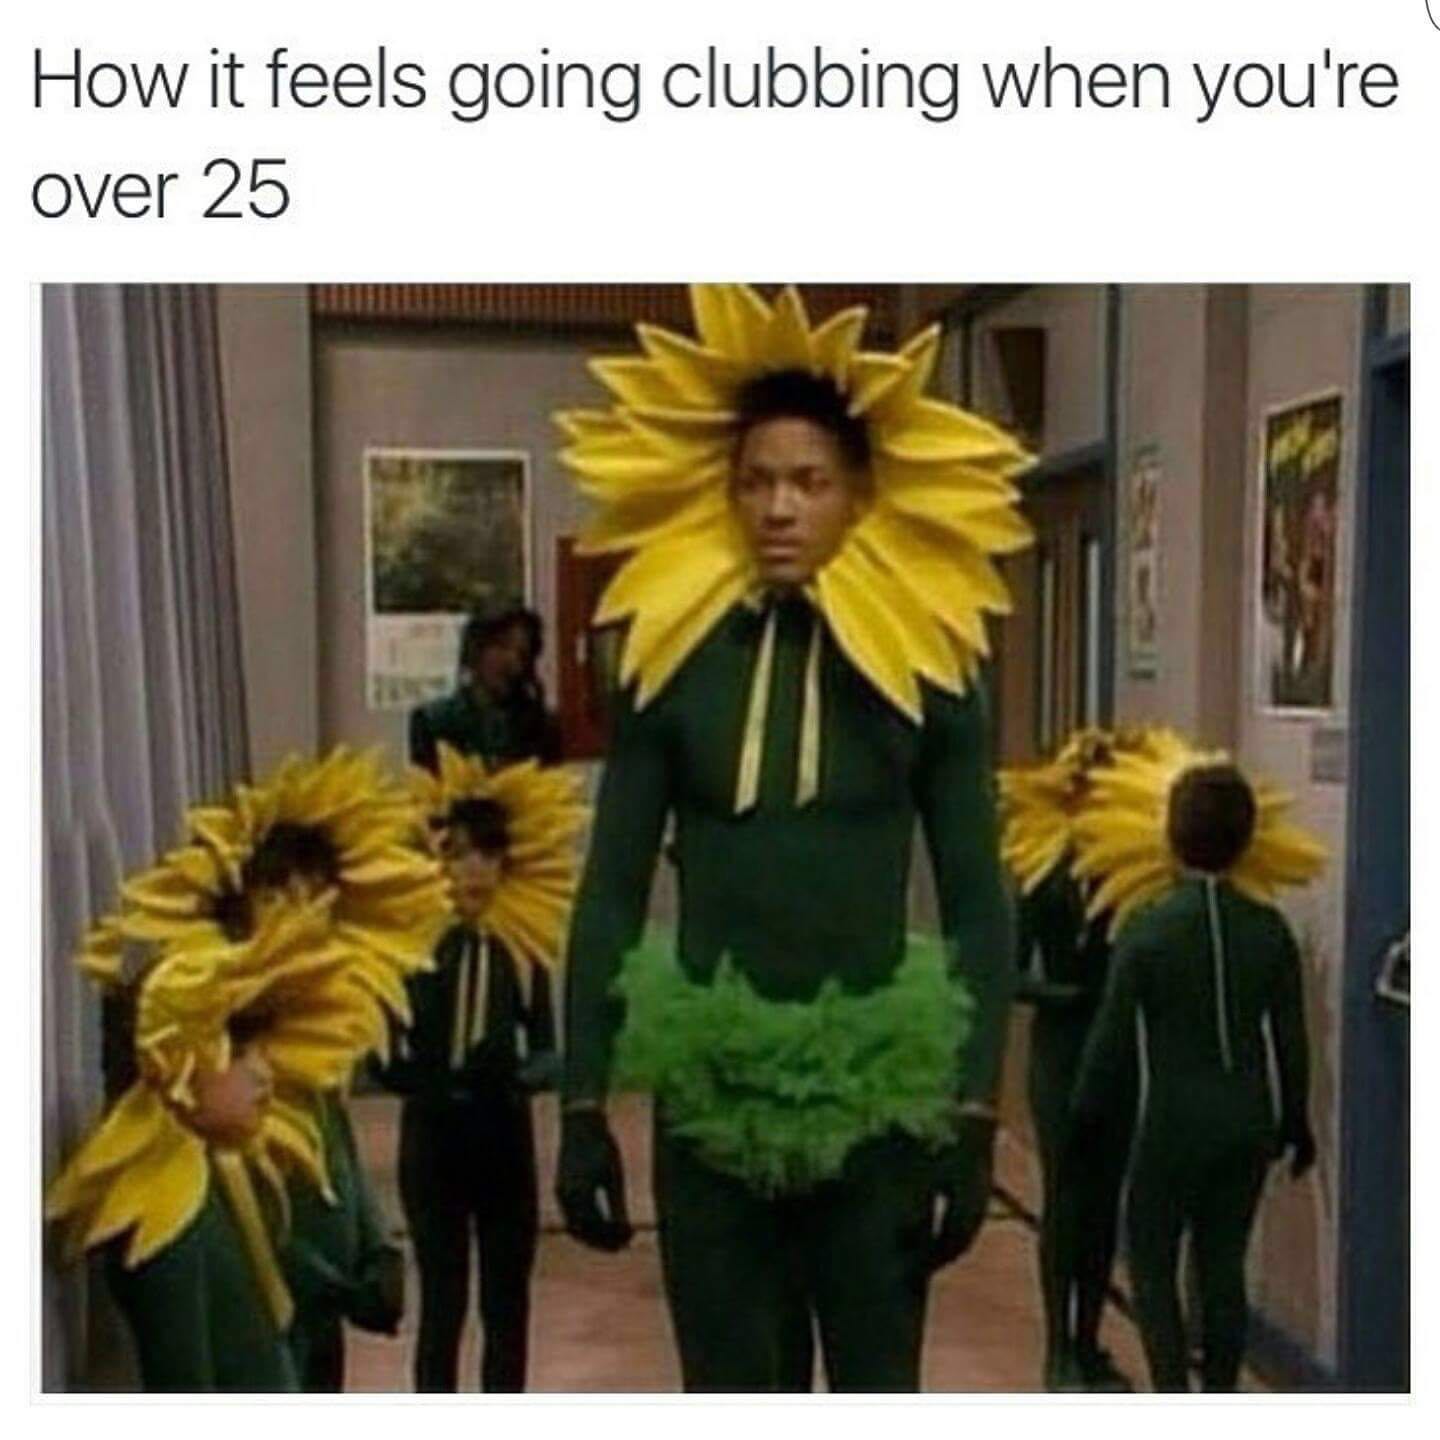 feels going clubbing when you re over 25 - How it feels going clubbing when you're over 25